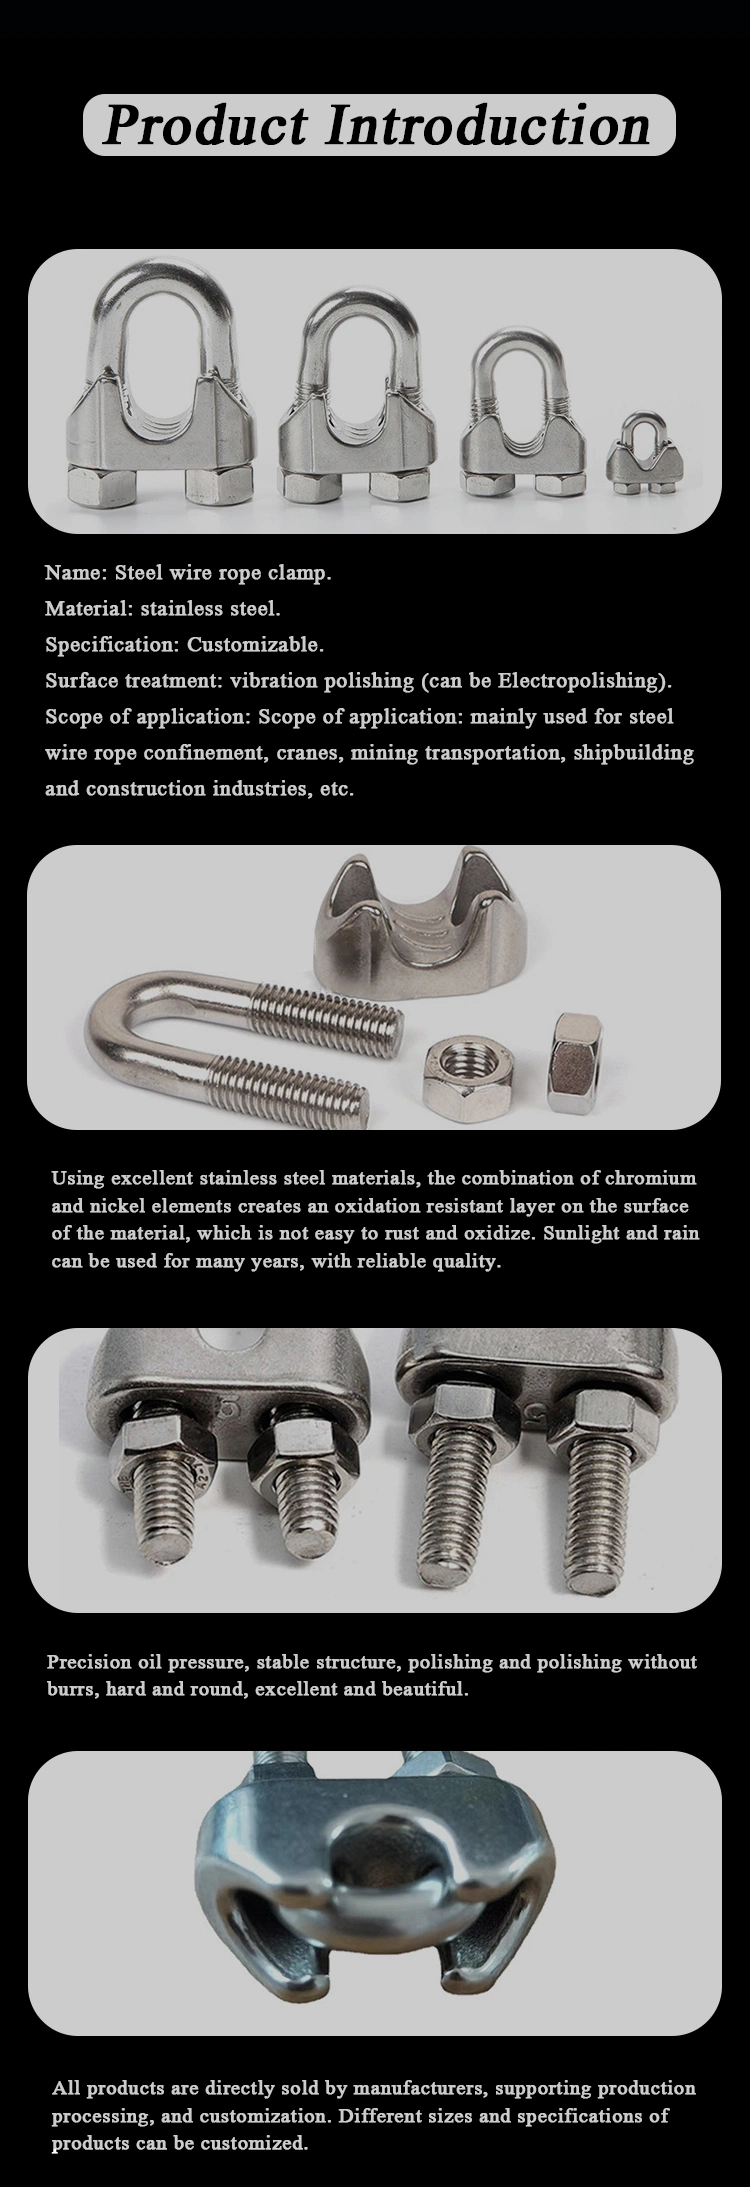 Factory Price 304 Stainless Steel Wire Rope Clips Card Head